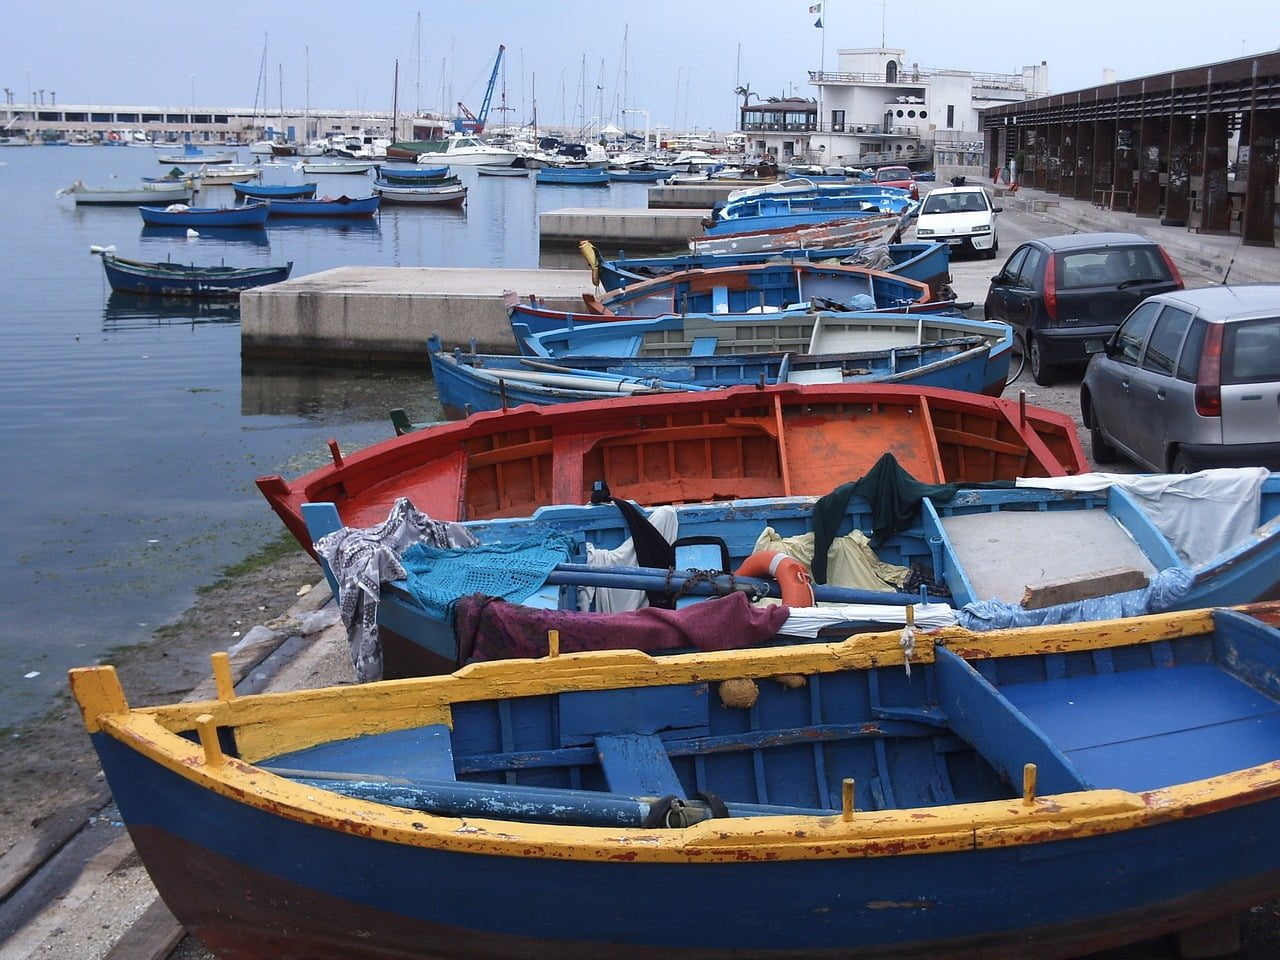 Bari colourful boats at the port in Southern, Italy